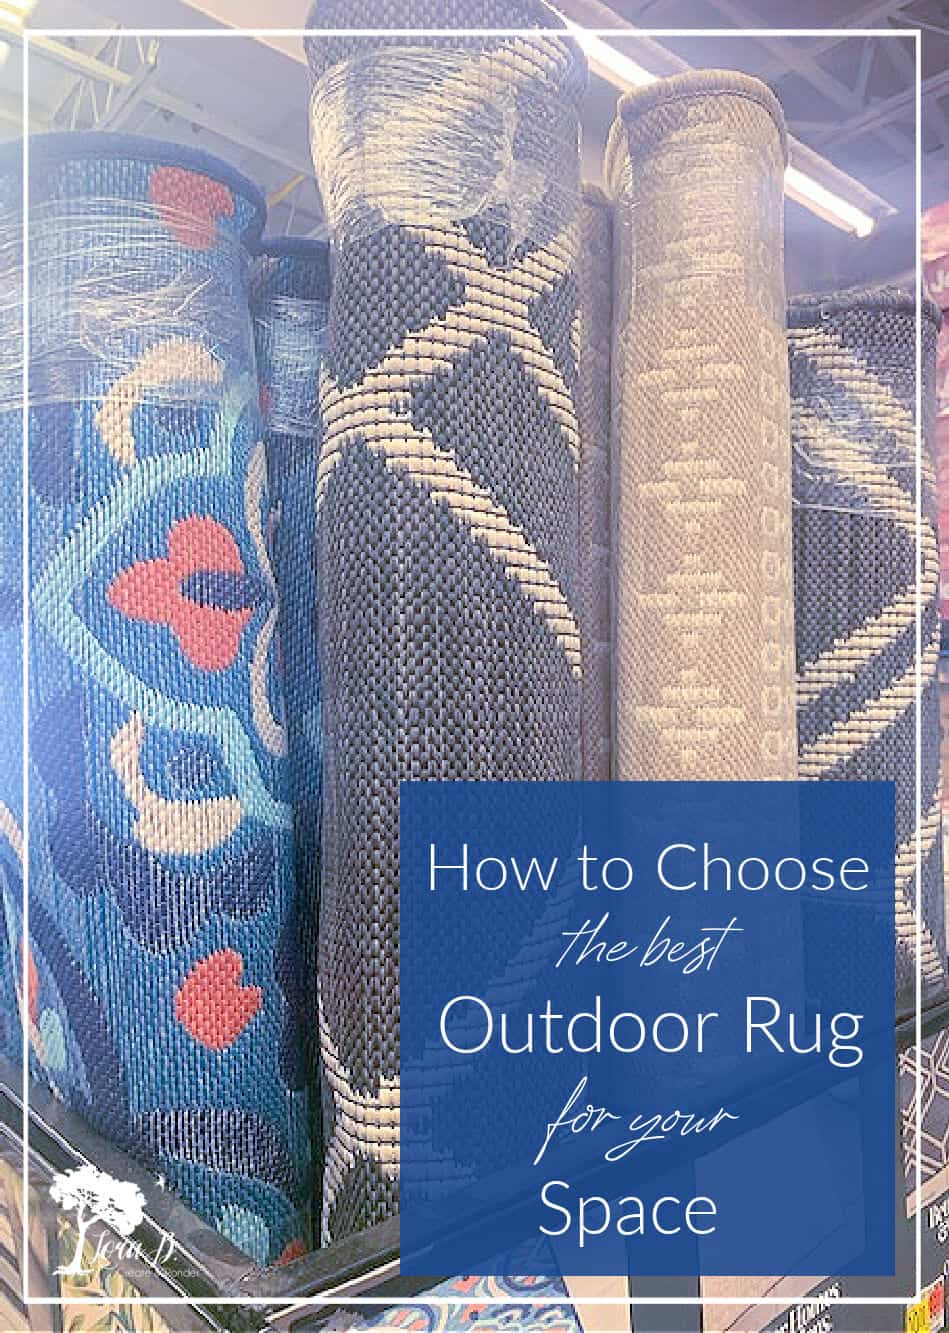 How to Choose the Best Outdoor Rug for Your Space